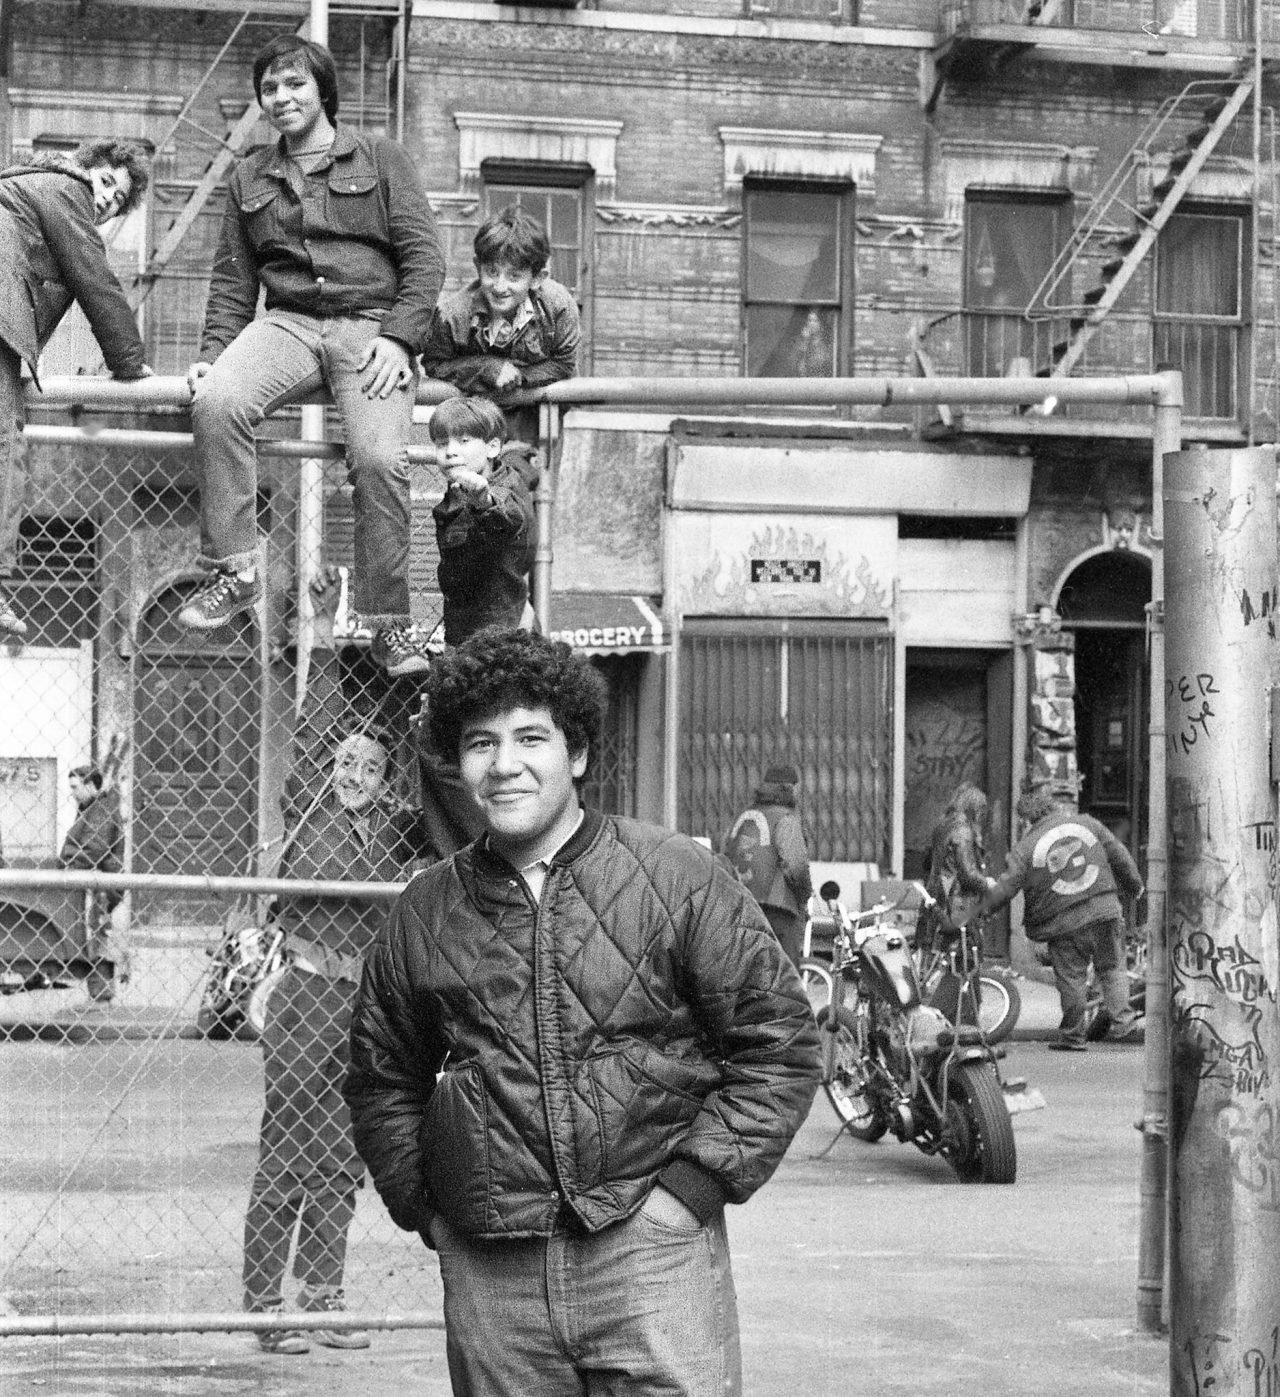 Big Fernando with Defenders of the Park William George John 76 E 3rd St ...